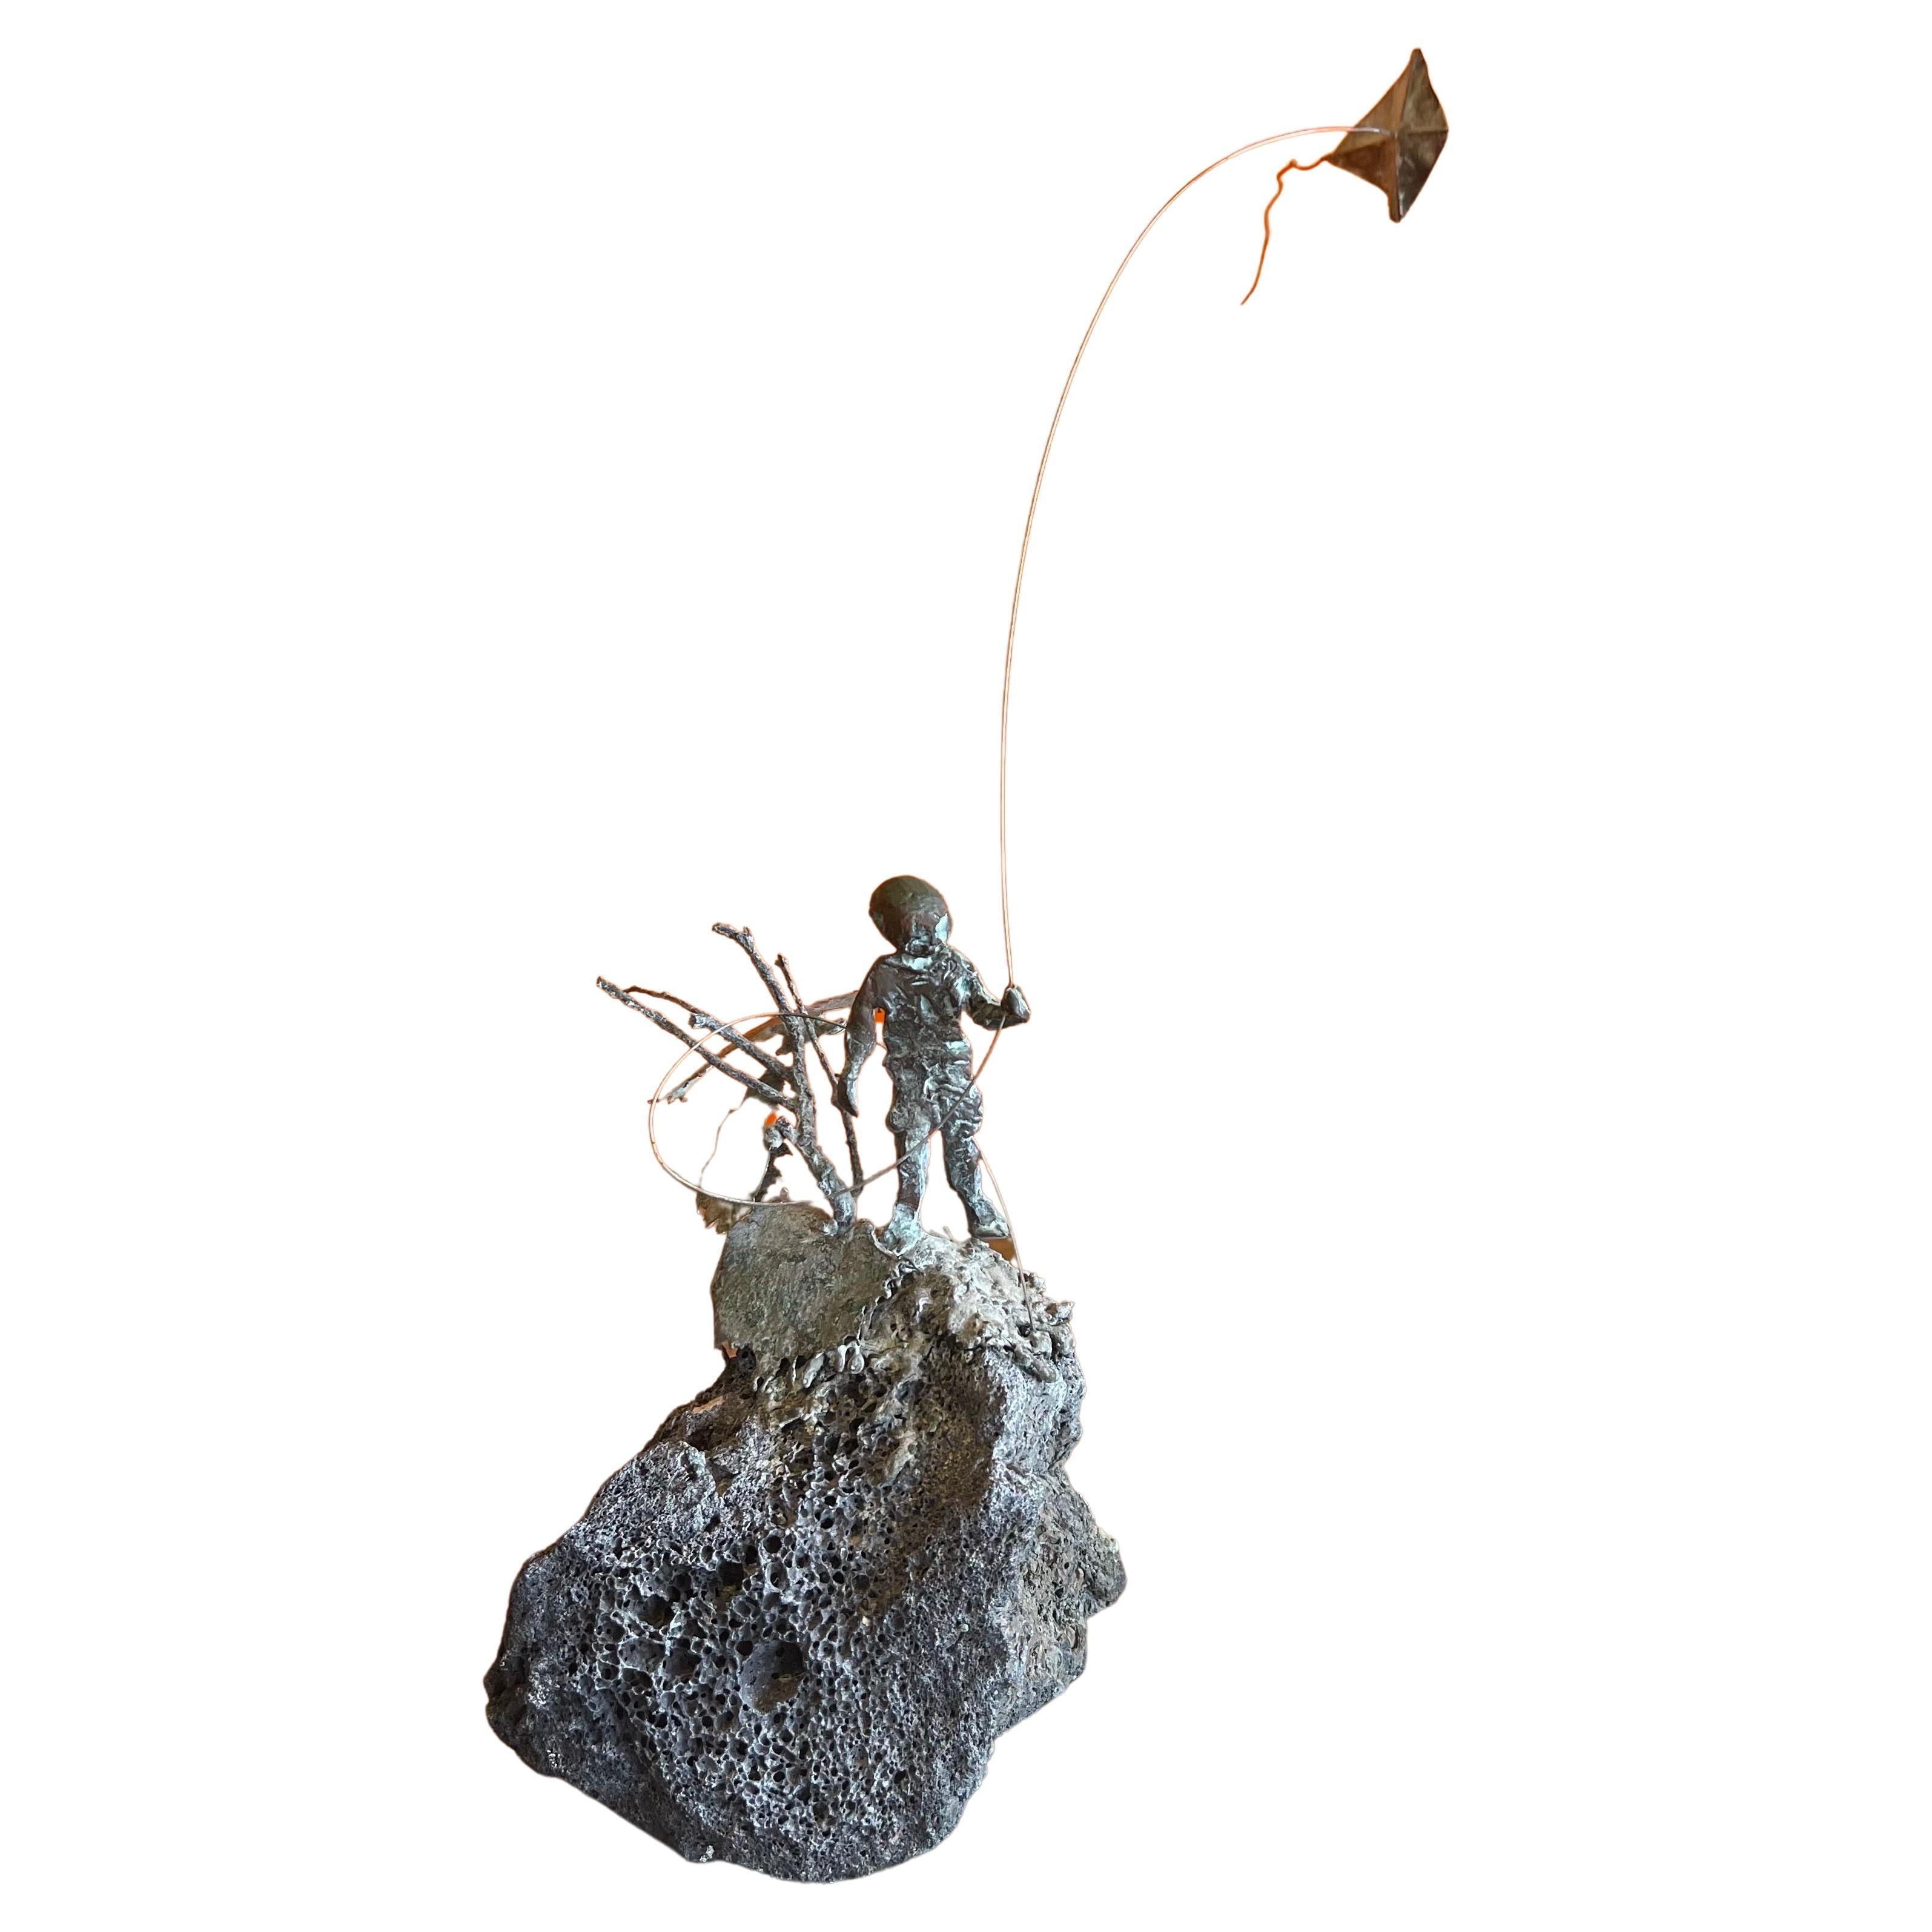 Child Flying Kite Bronze on Volcanic Rock Sculpture by Malcolm Moran 7